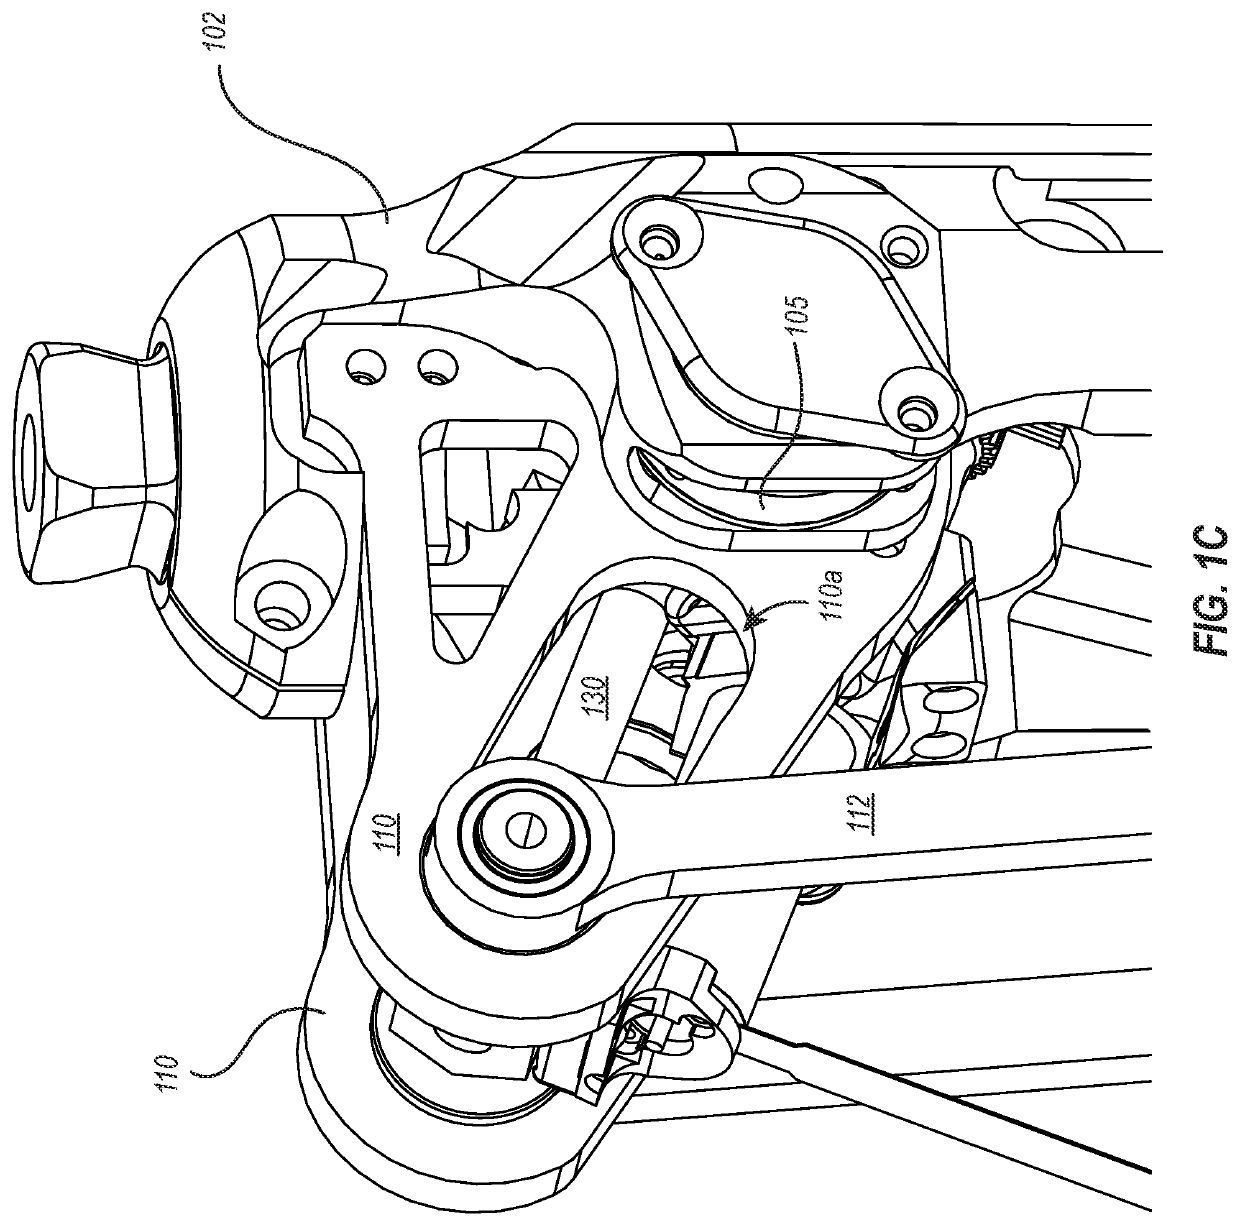 Variable transmission for assistive prosthesis device